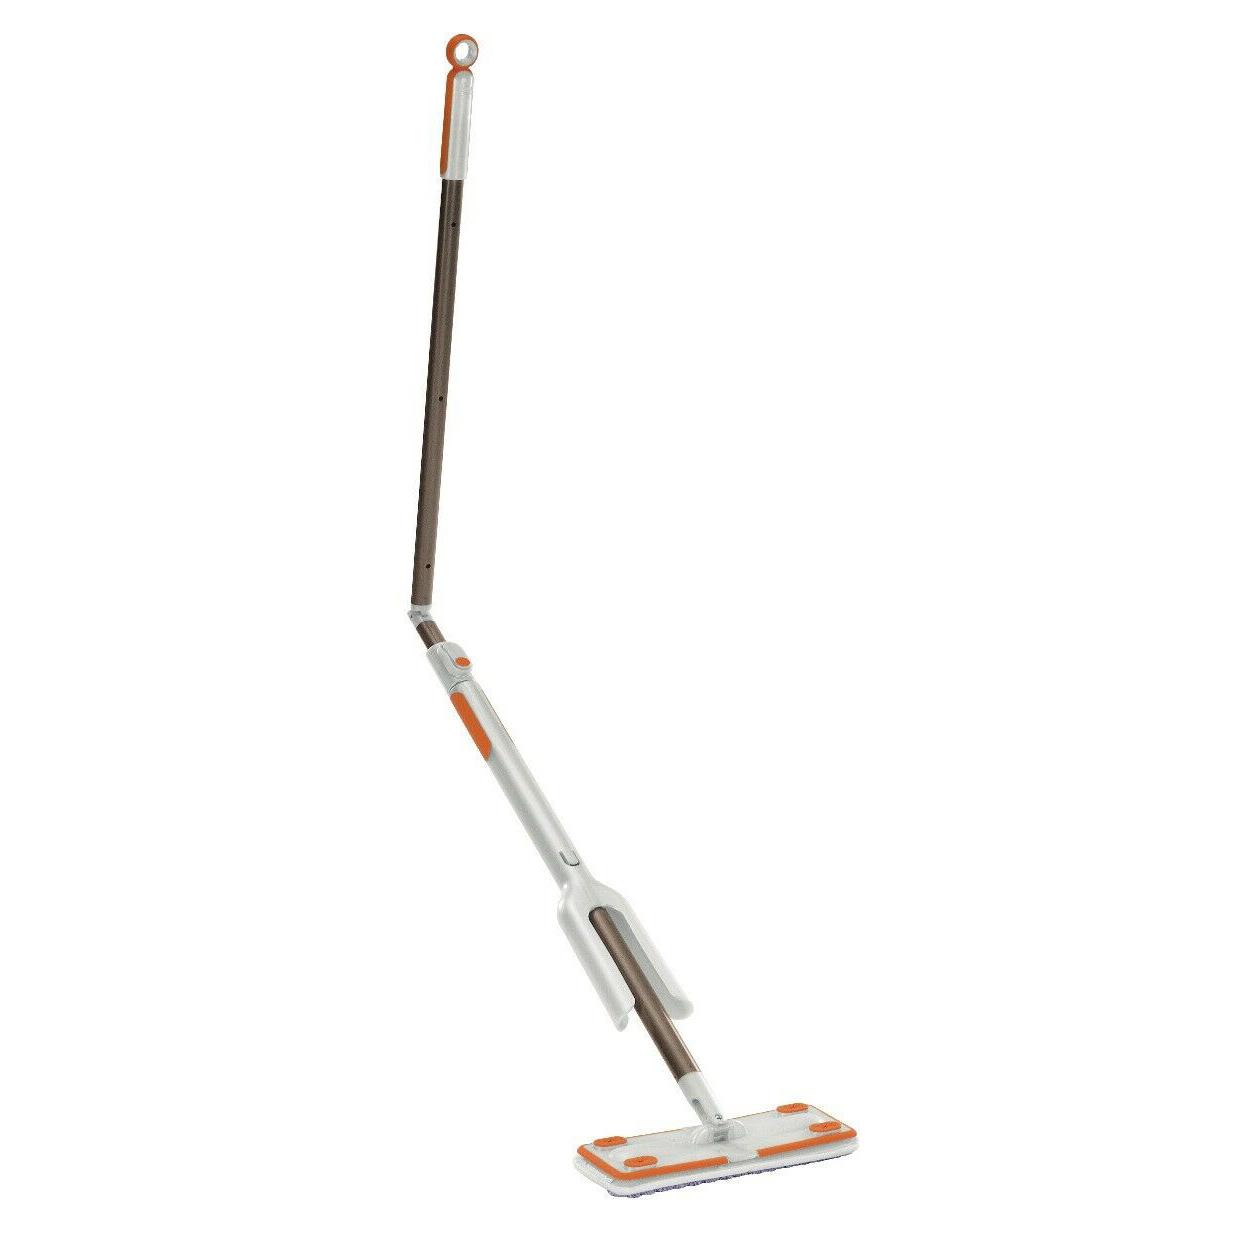 Bissell Smart Details Lightweight Swivel Mop for $7.49 Shipped